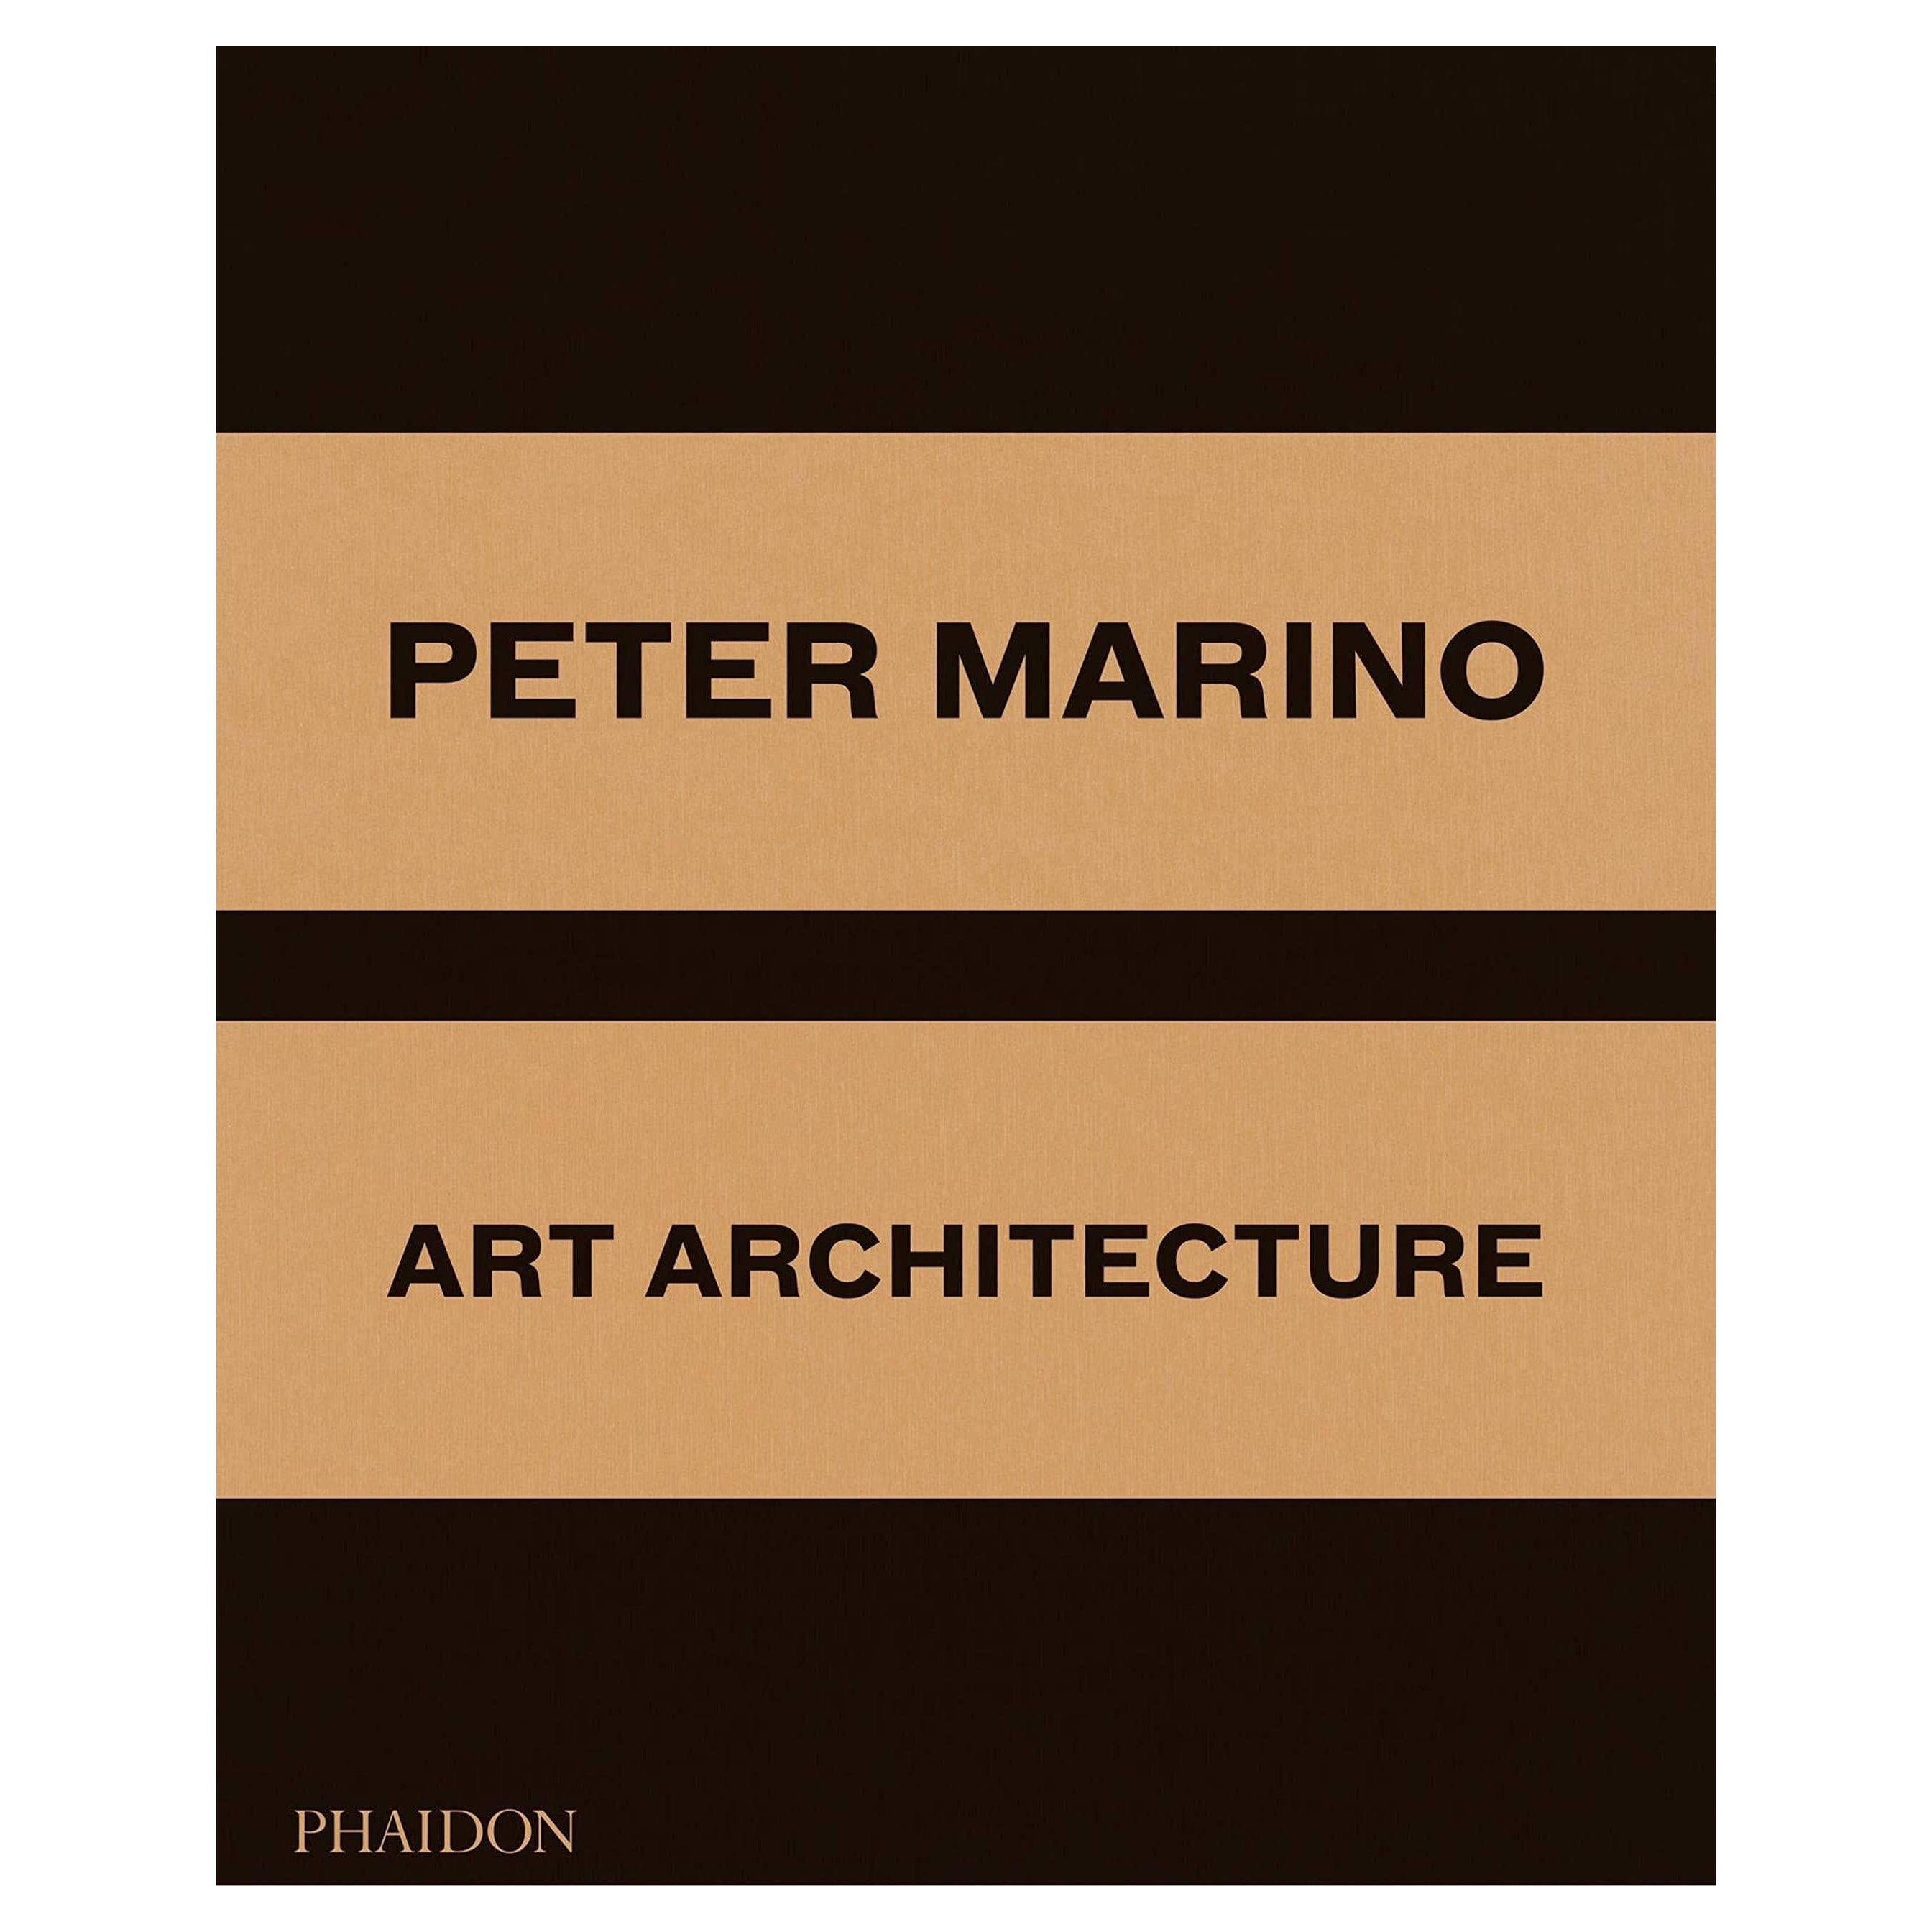 In Stock in Los Angeles, Peter Marino Art Architecture, Luxury Edition